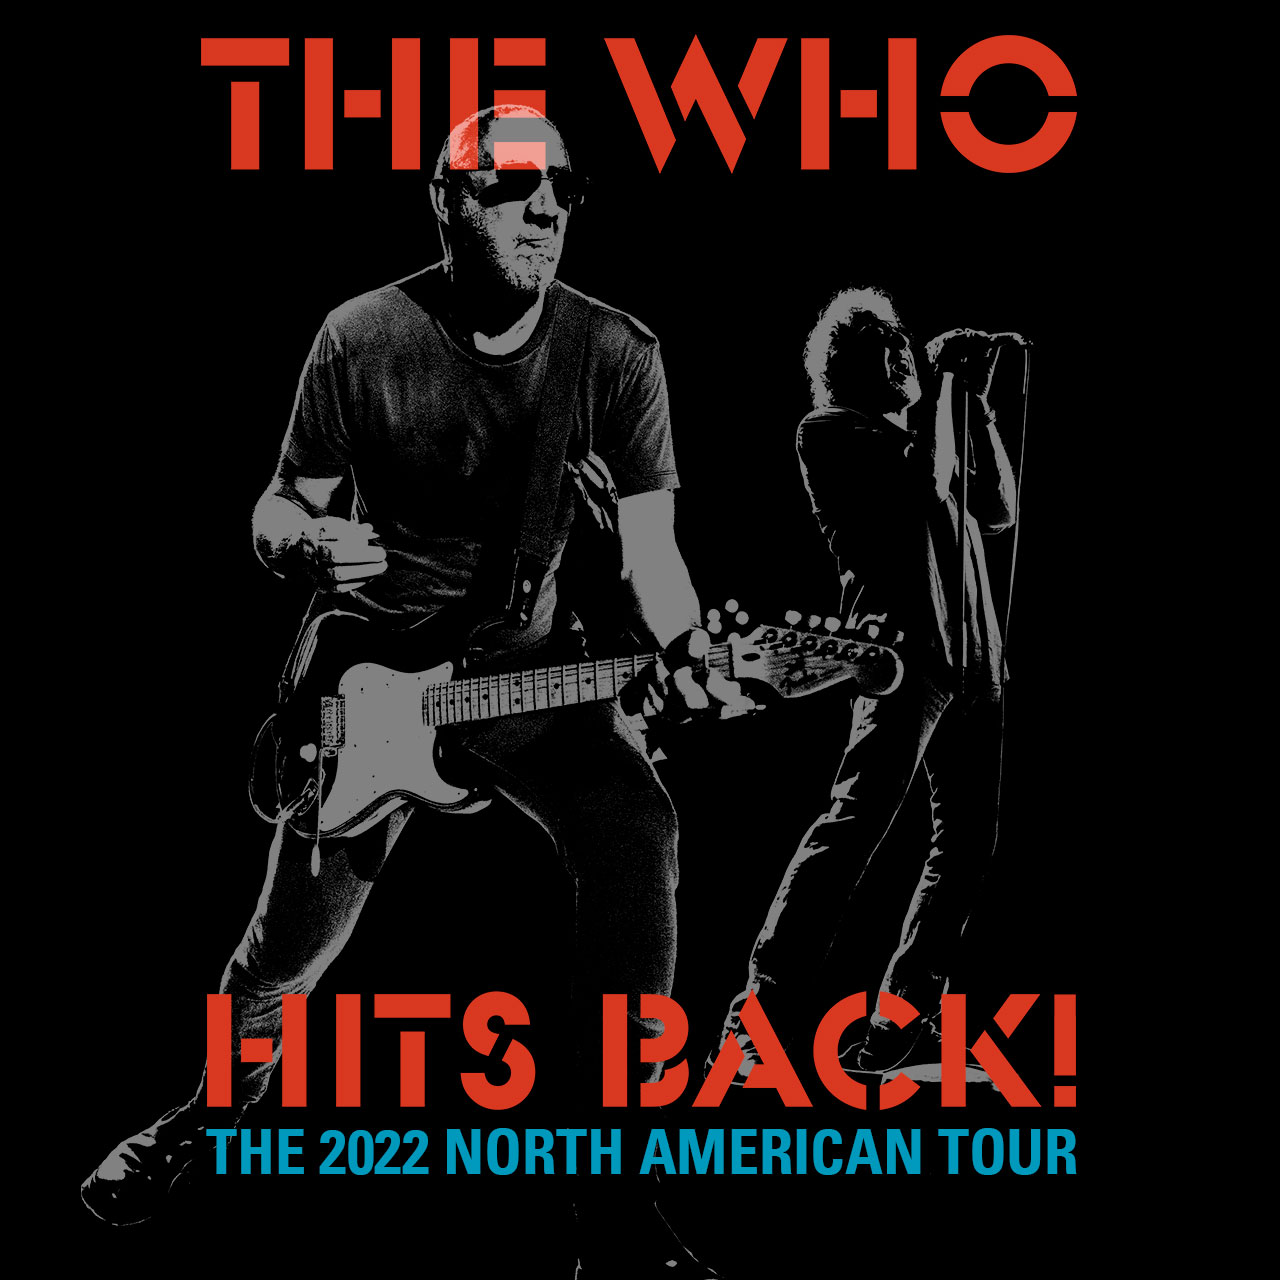 Hits Back! The 2022 North American Tour